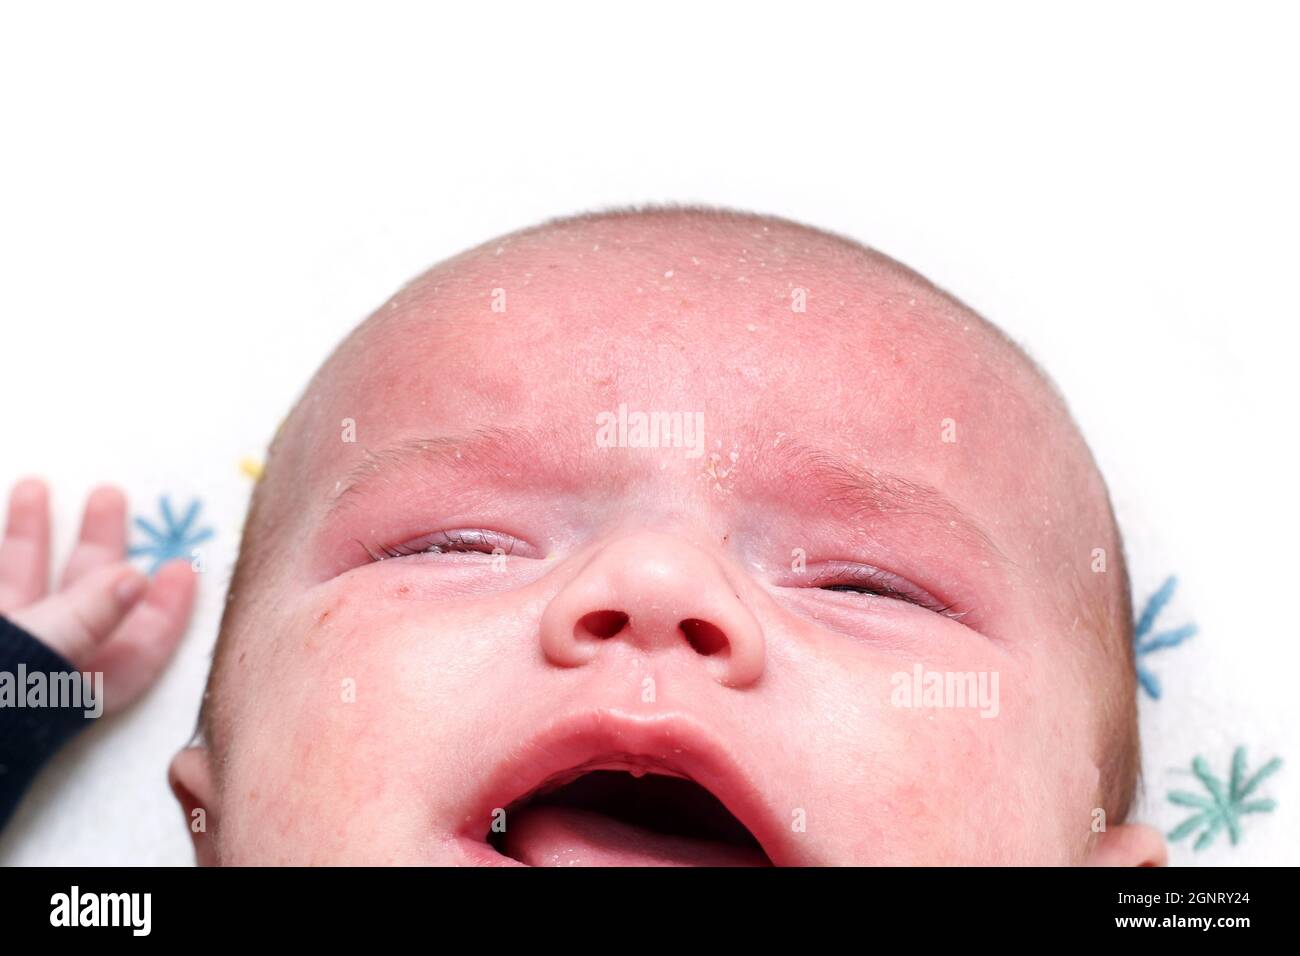 The detail of the head of the unhappy crying newborn baby boy with skin problems. He has seborea and acne. Stock Photo